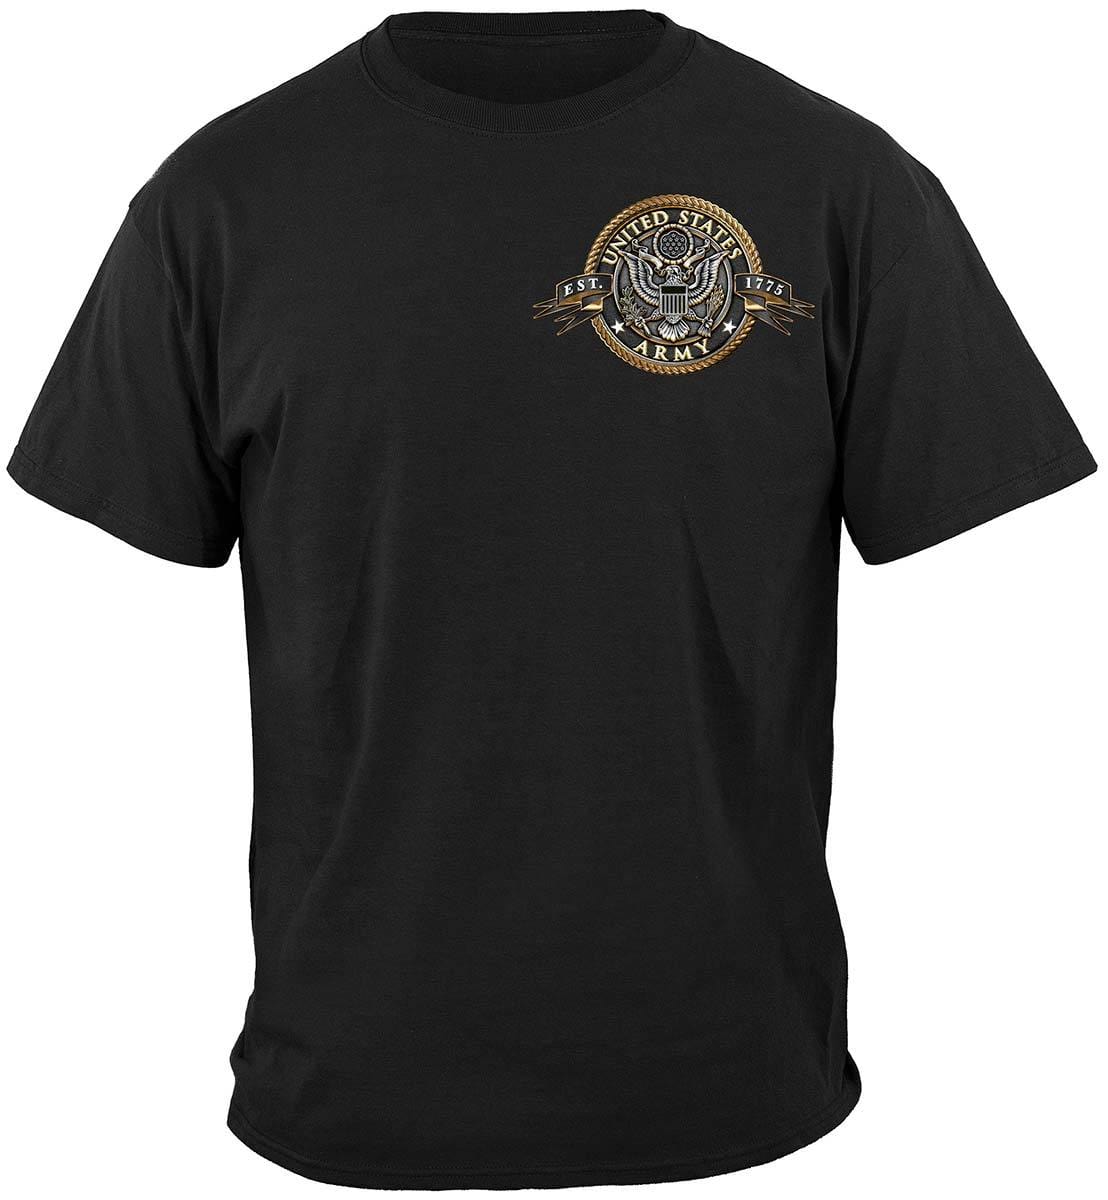 Army Gold Shield Badge Of Honor Premium Long Sleeves